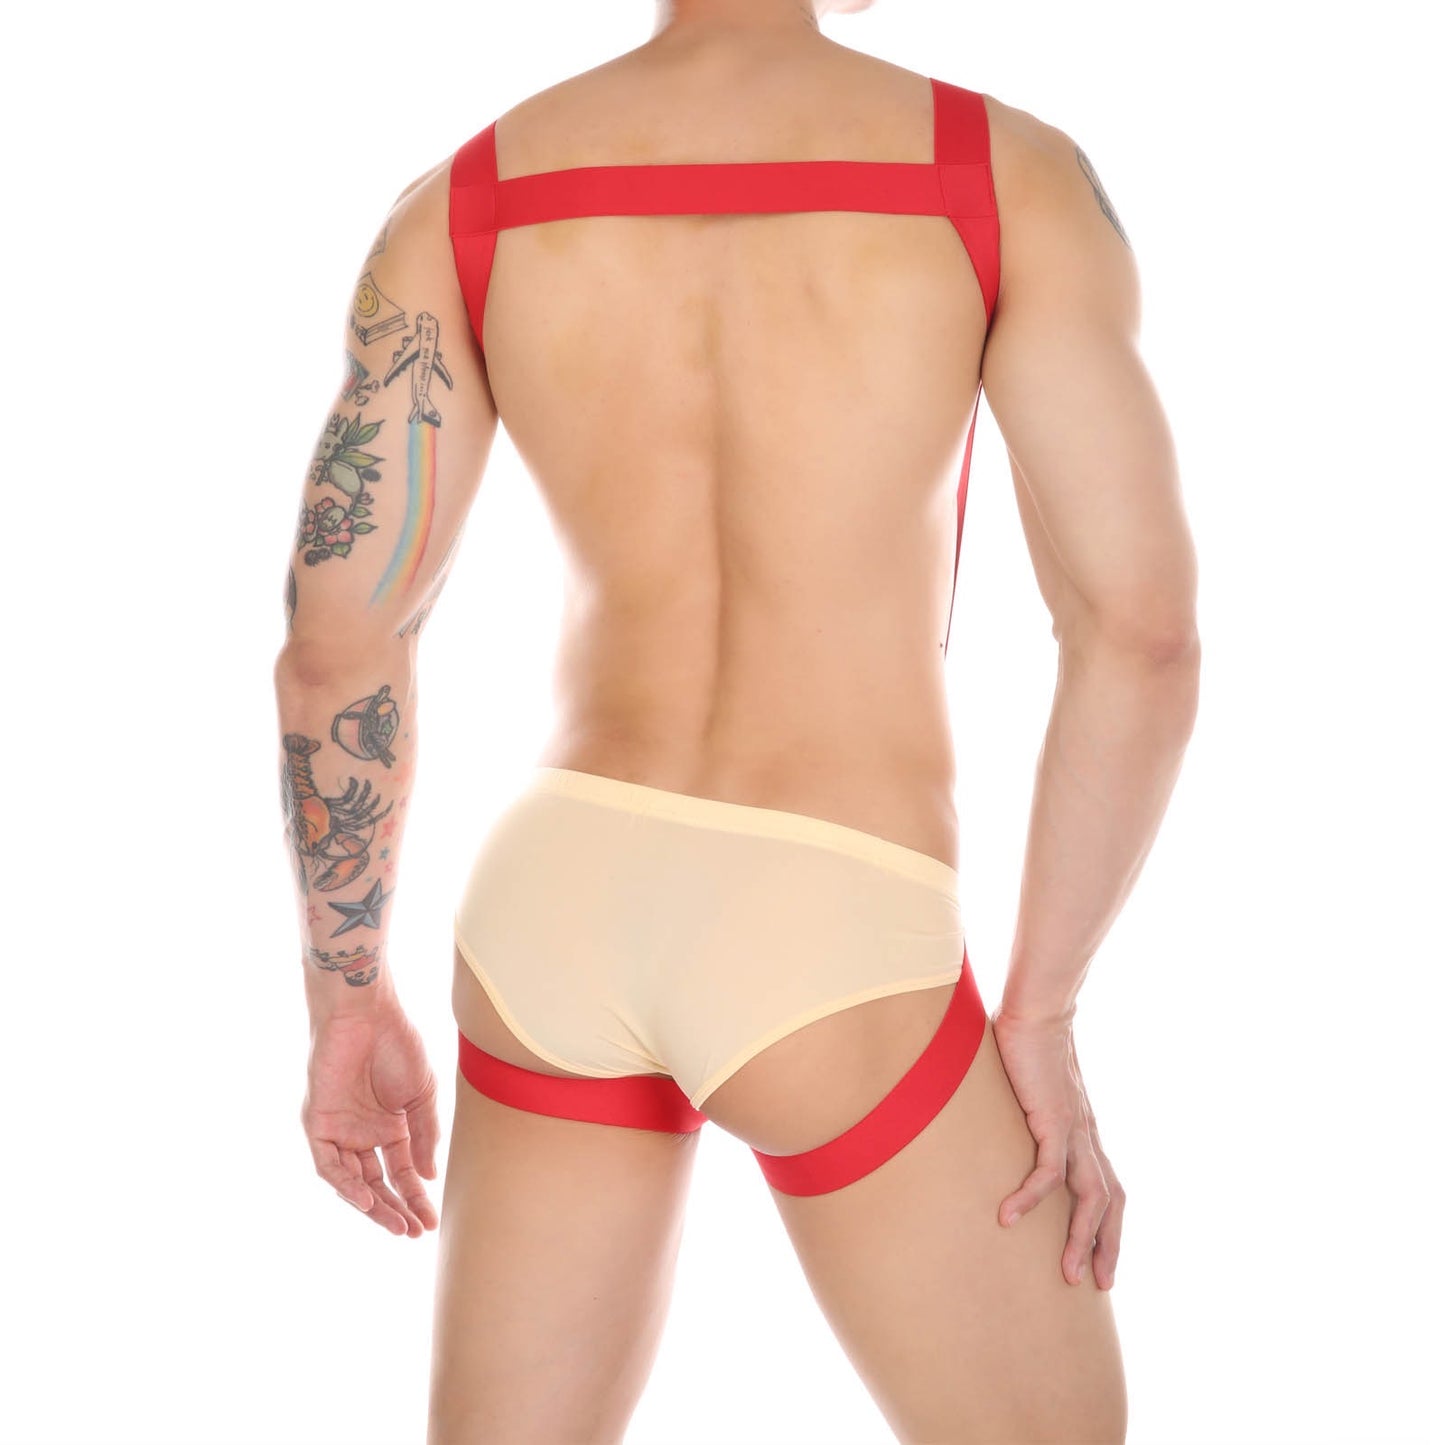 CLEVER-MENMODE C-RING BODYSUIT HARNESS